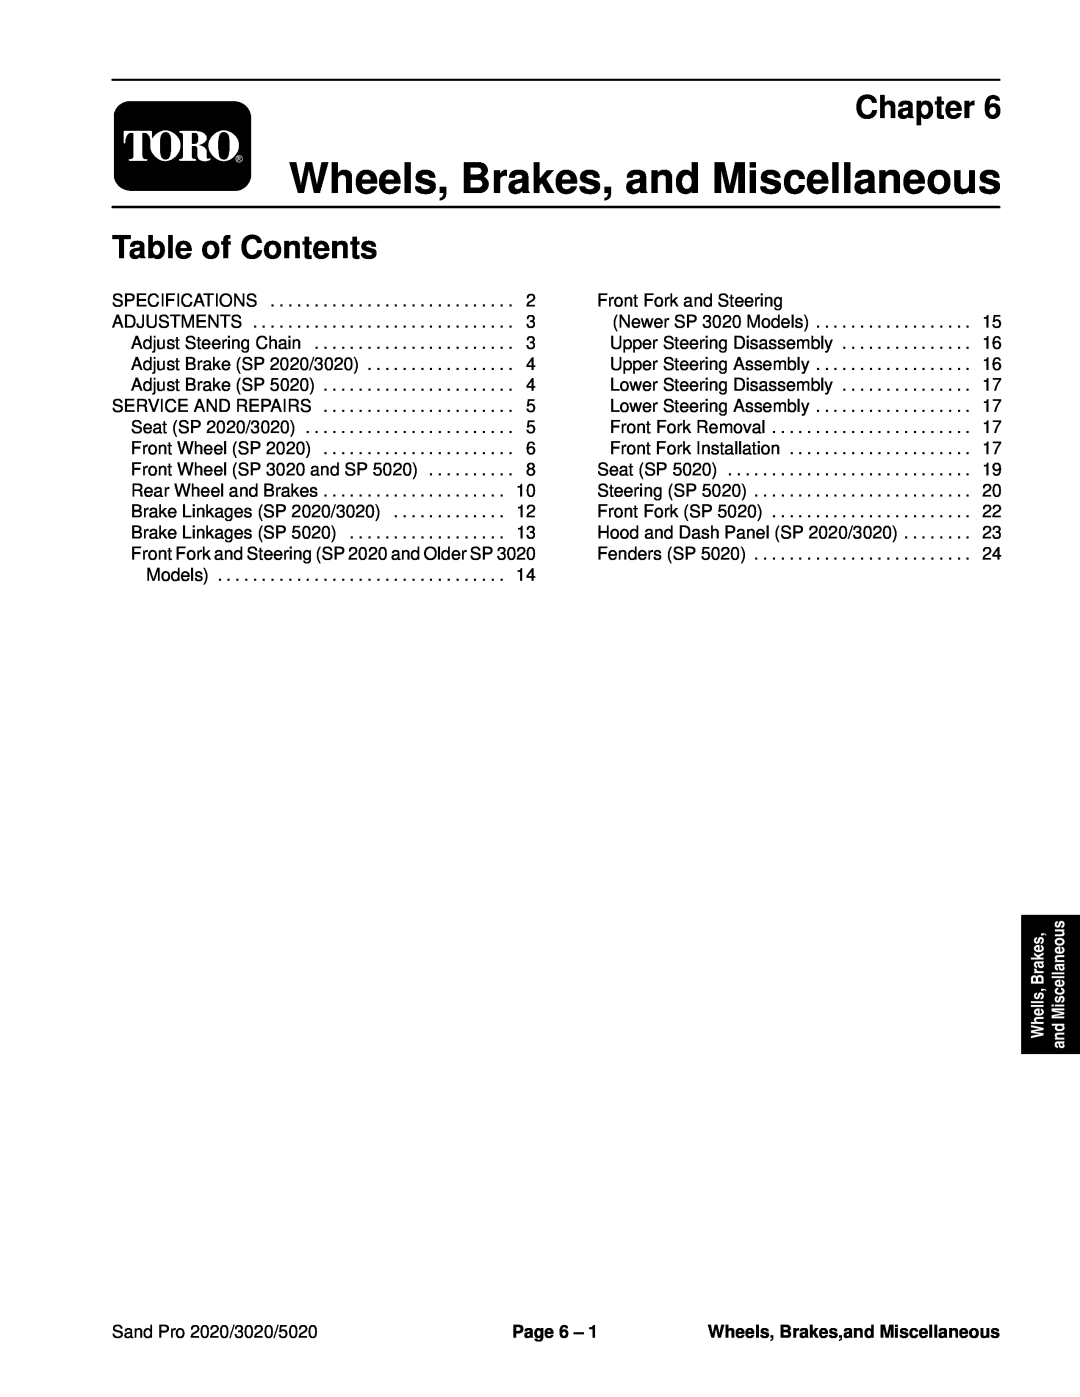 Toro service manual Wheels, Brakes, and Miscellaneous, Chapter, Table of Contents, Sand Pro 2020/3020/5020, Page 6 